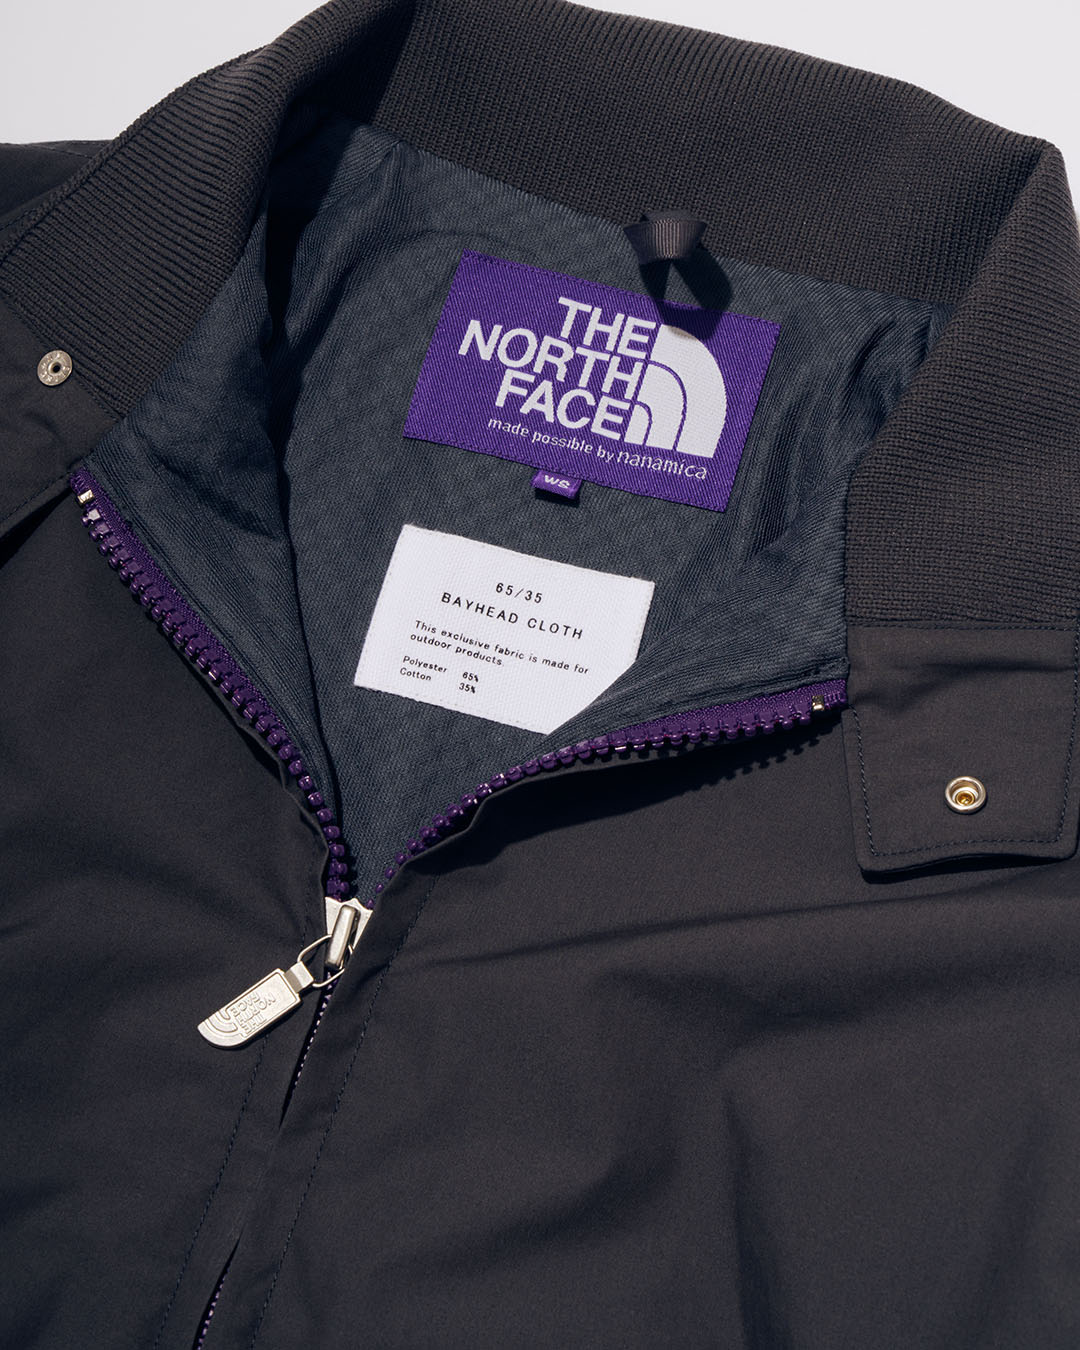 nanamica / THE NORTH FACE PURPLE LABEL / Featured Product vol.66